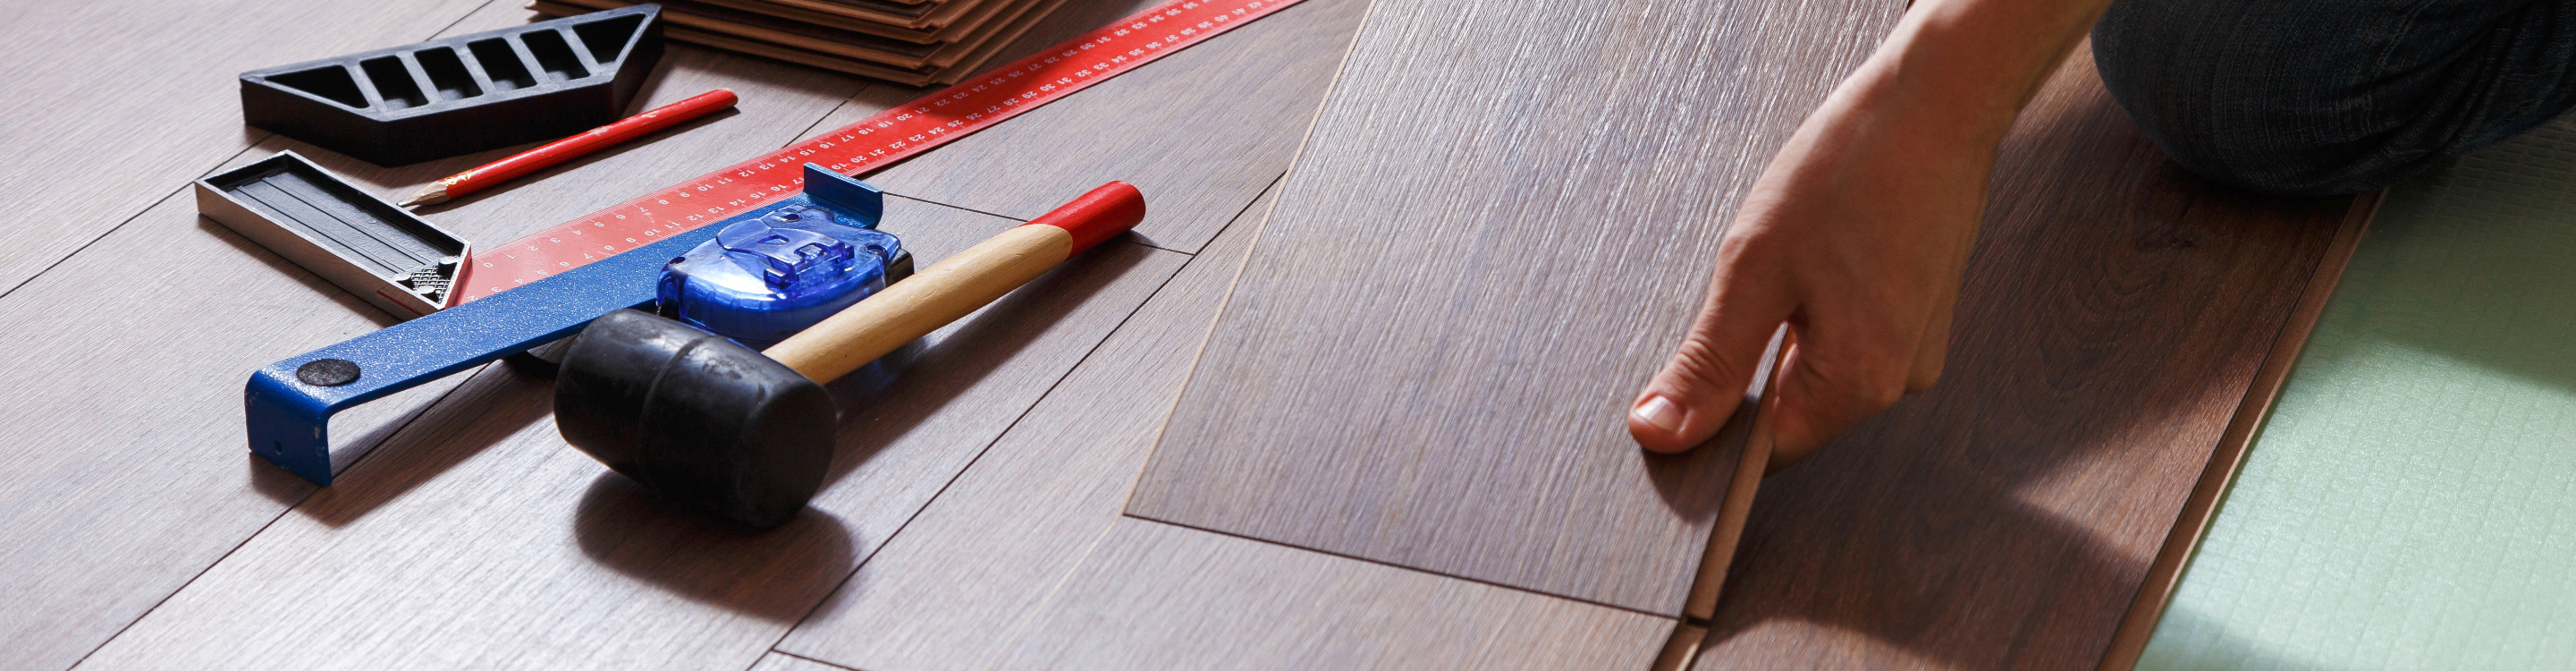 installation of wood flooring with tools